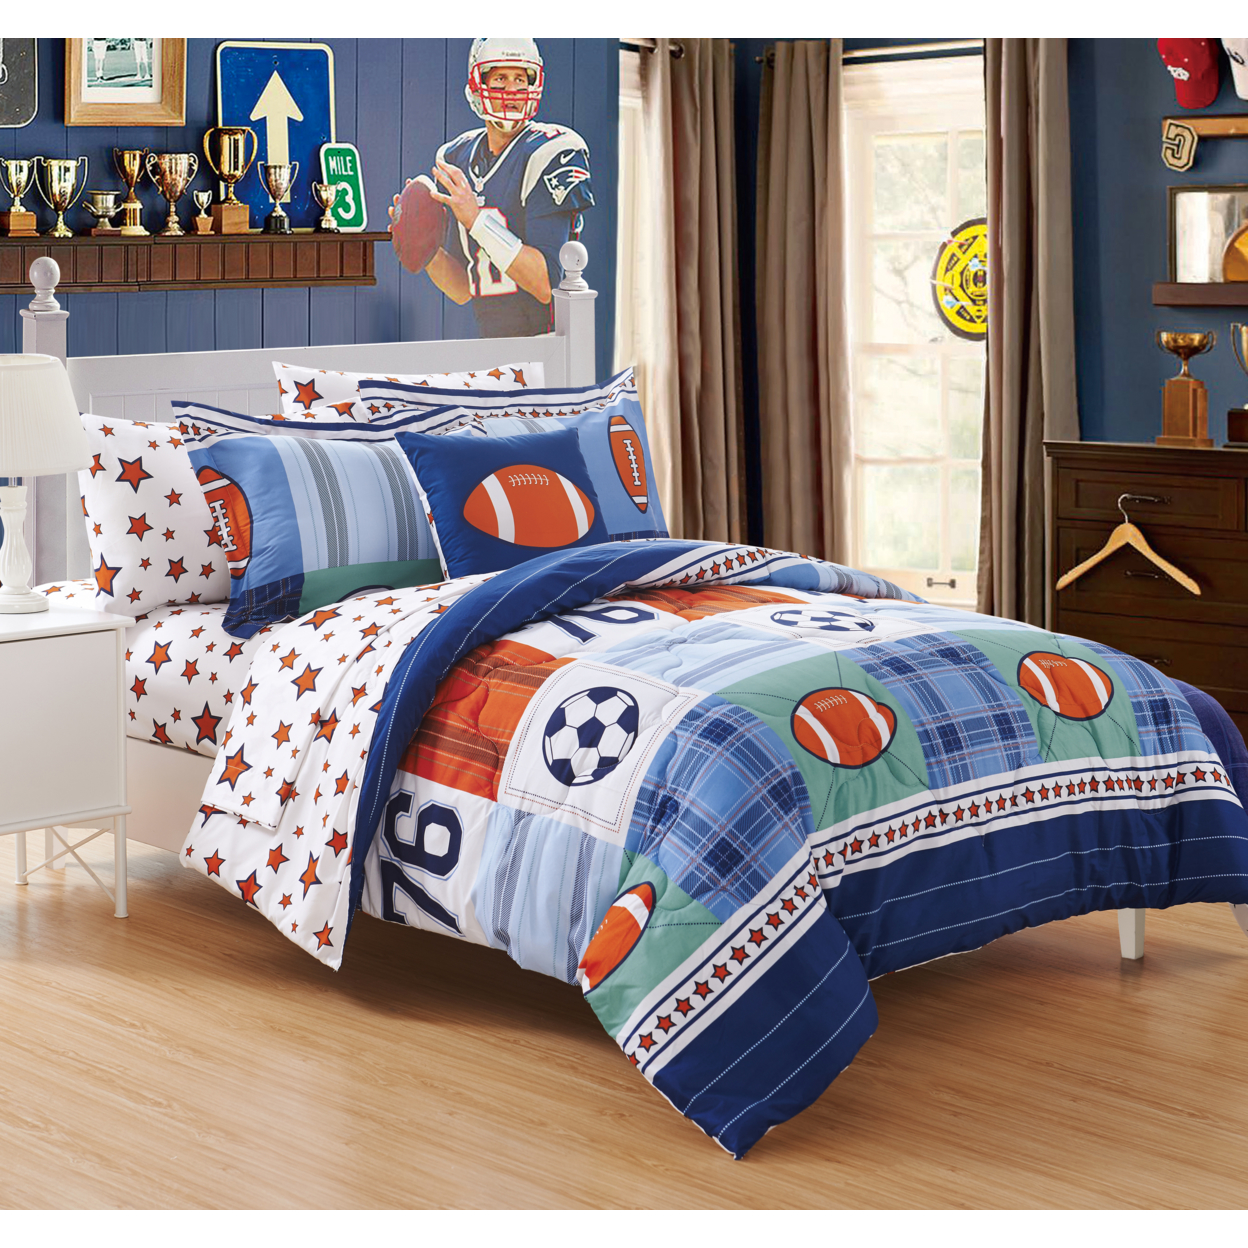 Back To School 6 Or 8 Piece Reversible Comforter Set Include Sheets - Blue, Full